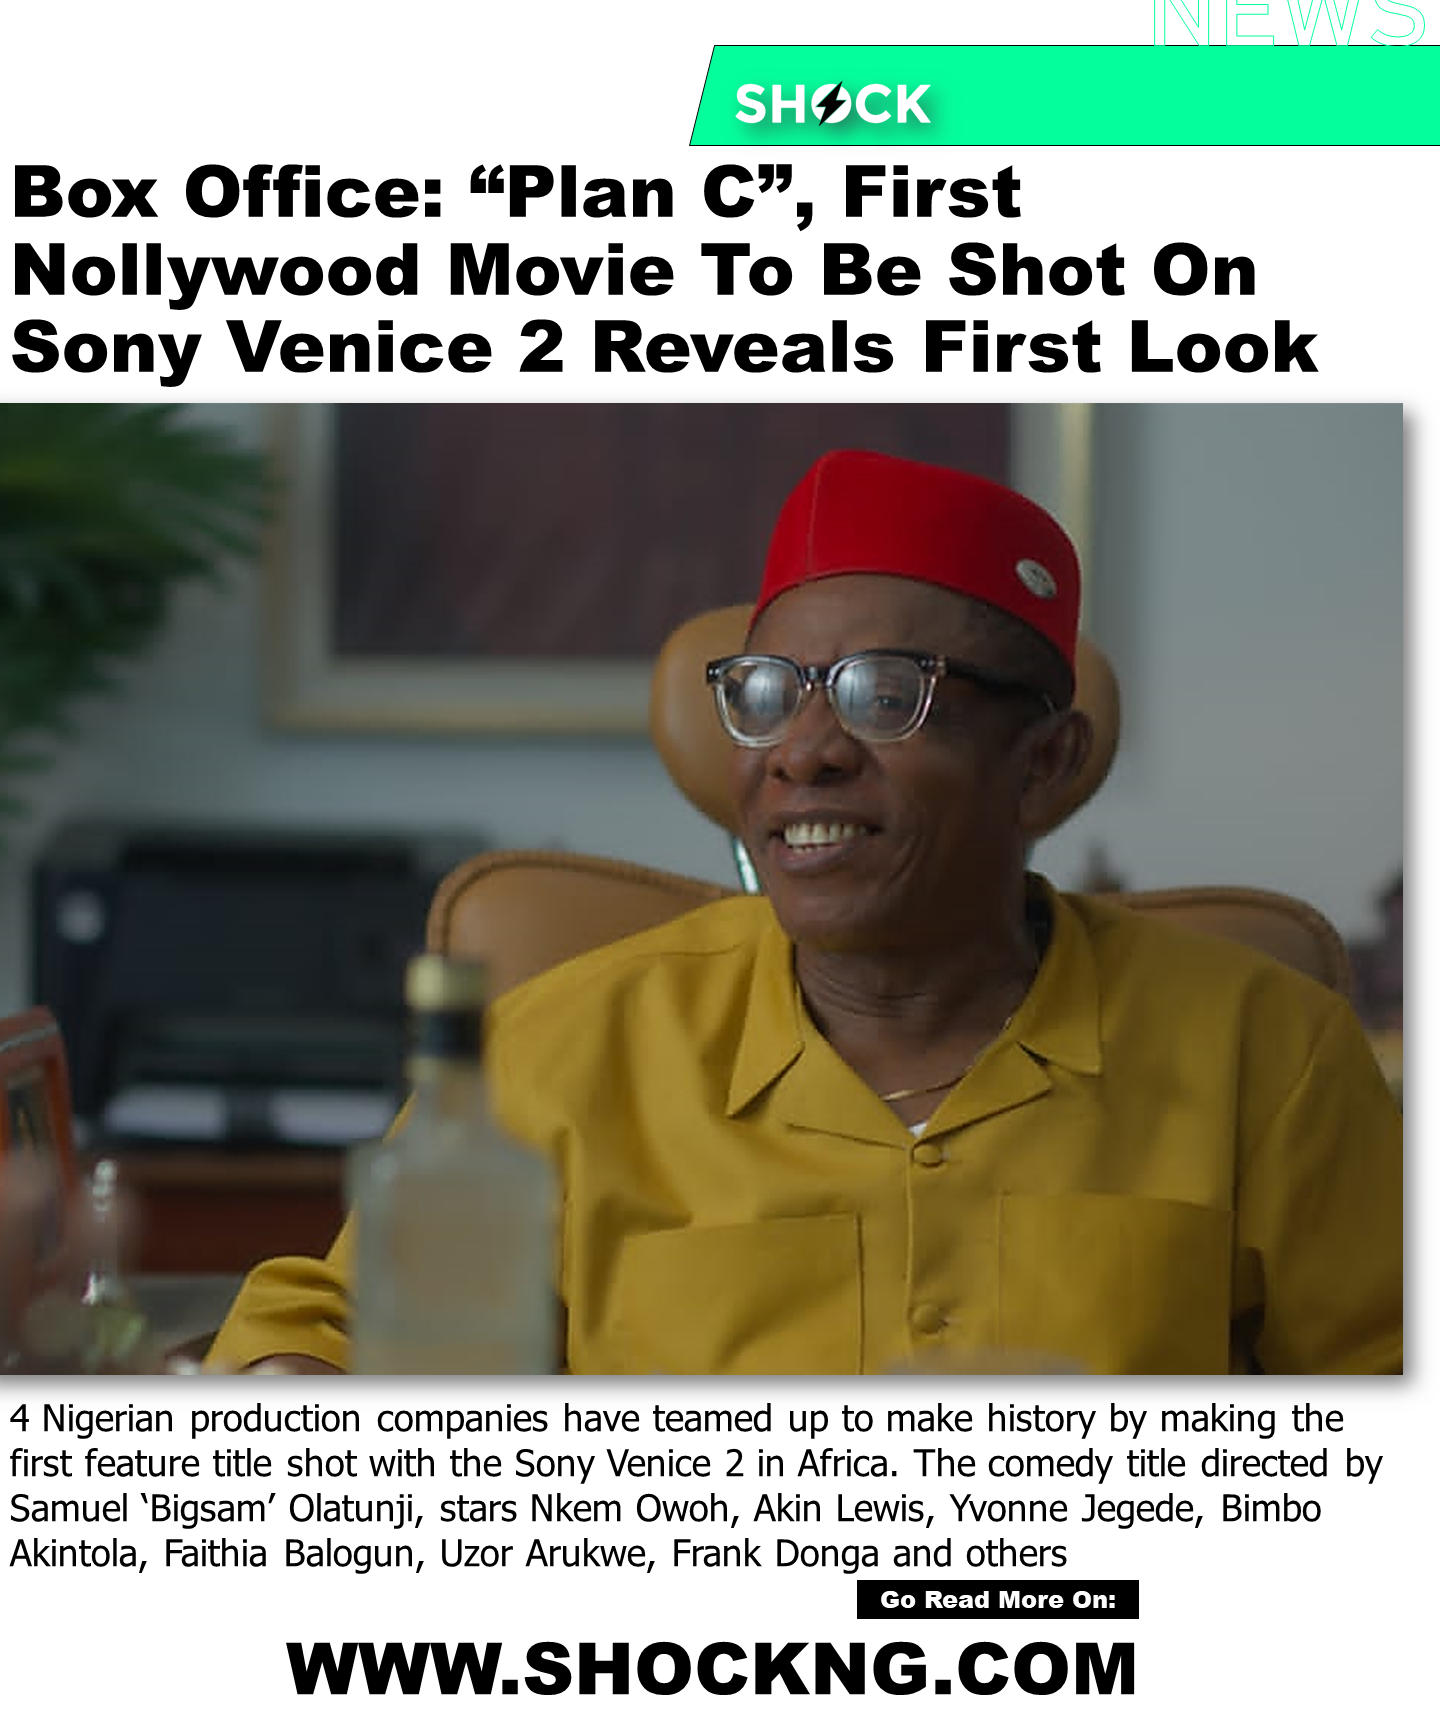 Plan c nollywood movie Nkem Owoh - “Plan C" Movie: First Nollywood Movie To Be Shot On Sony Venice 2 Reveals First Look